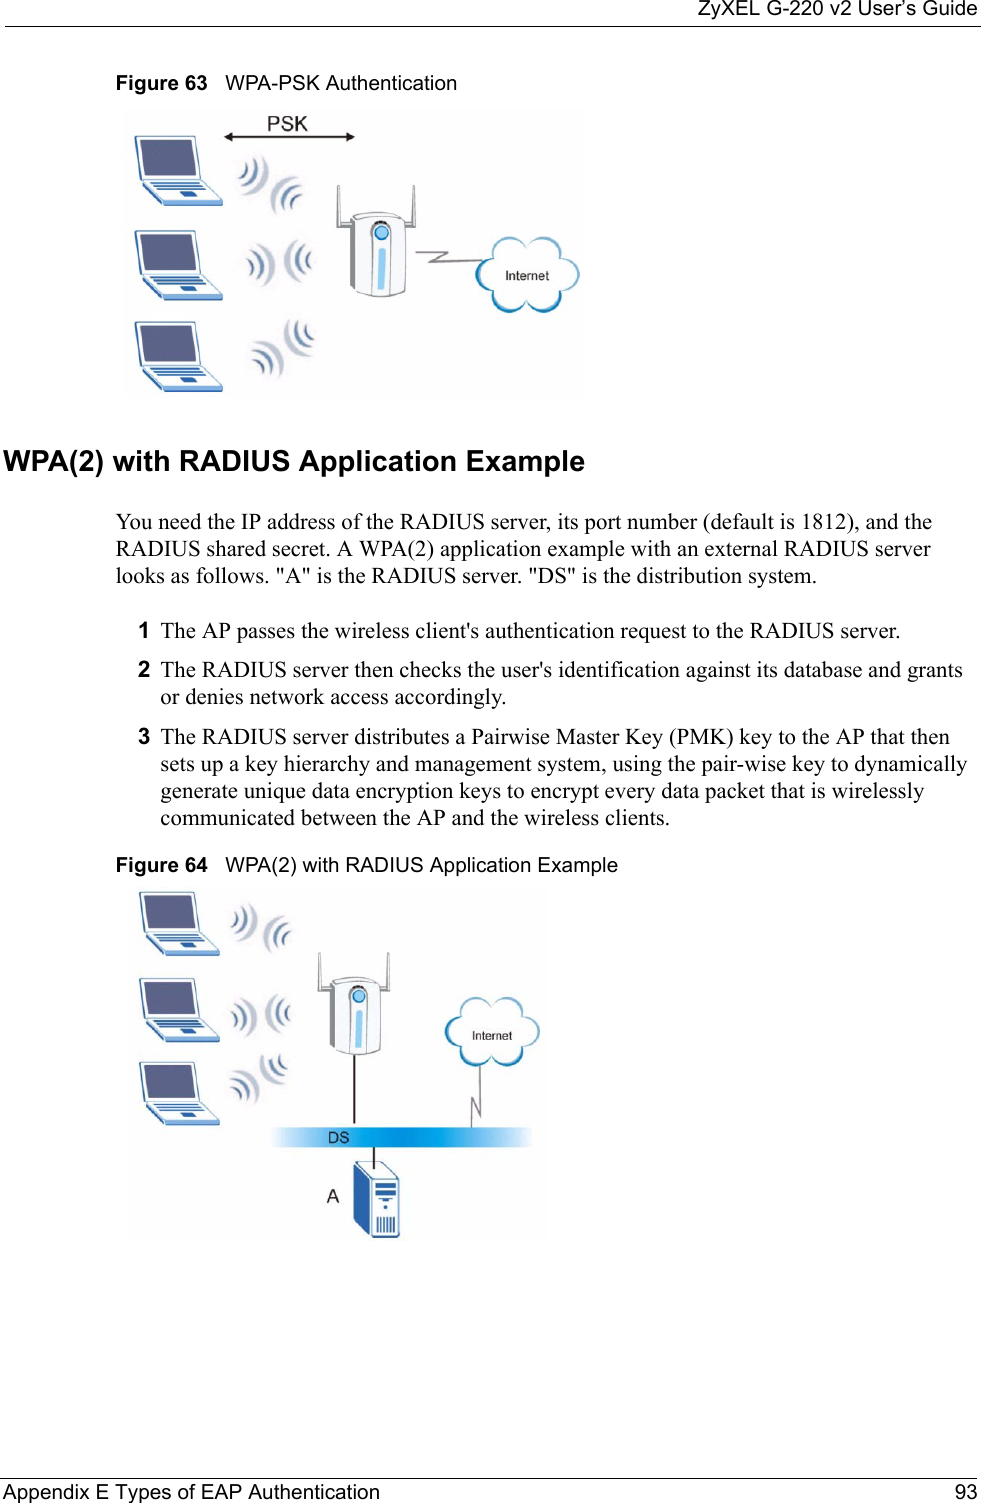 ZyXEL G-220 v2 User’s GuideAppendix E Types of EAP Authentication 93Figure 63   WPA-PSK AuthenticationWPA(2) with RADIUS Application ExampleYou need the IP address of the RADIUS server, its port number (default is 1812), and the RADIUS shared secret. A WPA(2) application example with an external RADIUS server looks as follows. &quot;A&quot; is the RADIUS server. &quot;DS&quot; is the distribution system.1The AP passes the wireless client&apos;s authentication request to the RADIUS server.2The RADIUS server then checks the user&apos;s identification against its database and grants or denies network access accordingly.3The RADIUS server distributes a Pairwise Master Key (PMK) key to the AP that then sets up a key hierarchy and management system, using the pair-wise key to dynamically generate unique data encryption keys to encrypt every data packet that is wirelessly communicated between the AP and the wireless clients.Figure 64   WPA(2) with RADIUS Application Example